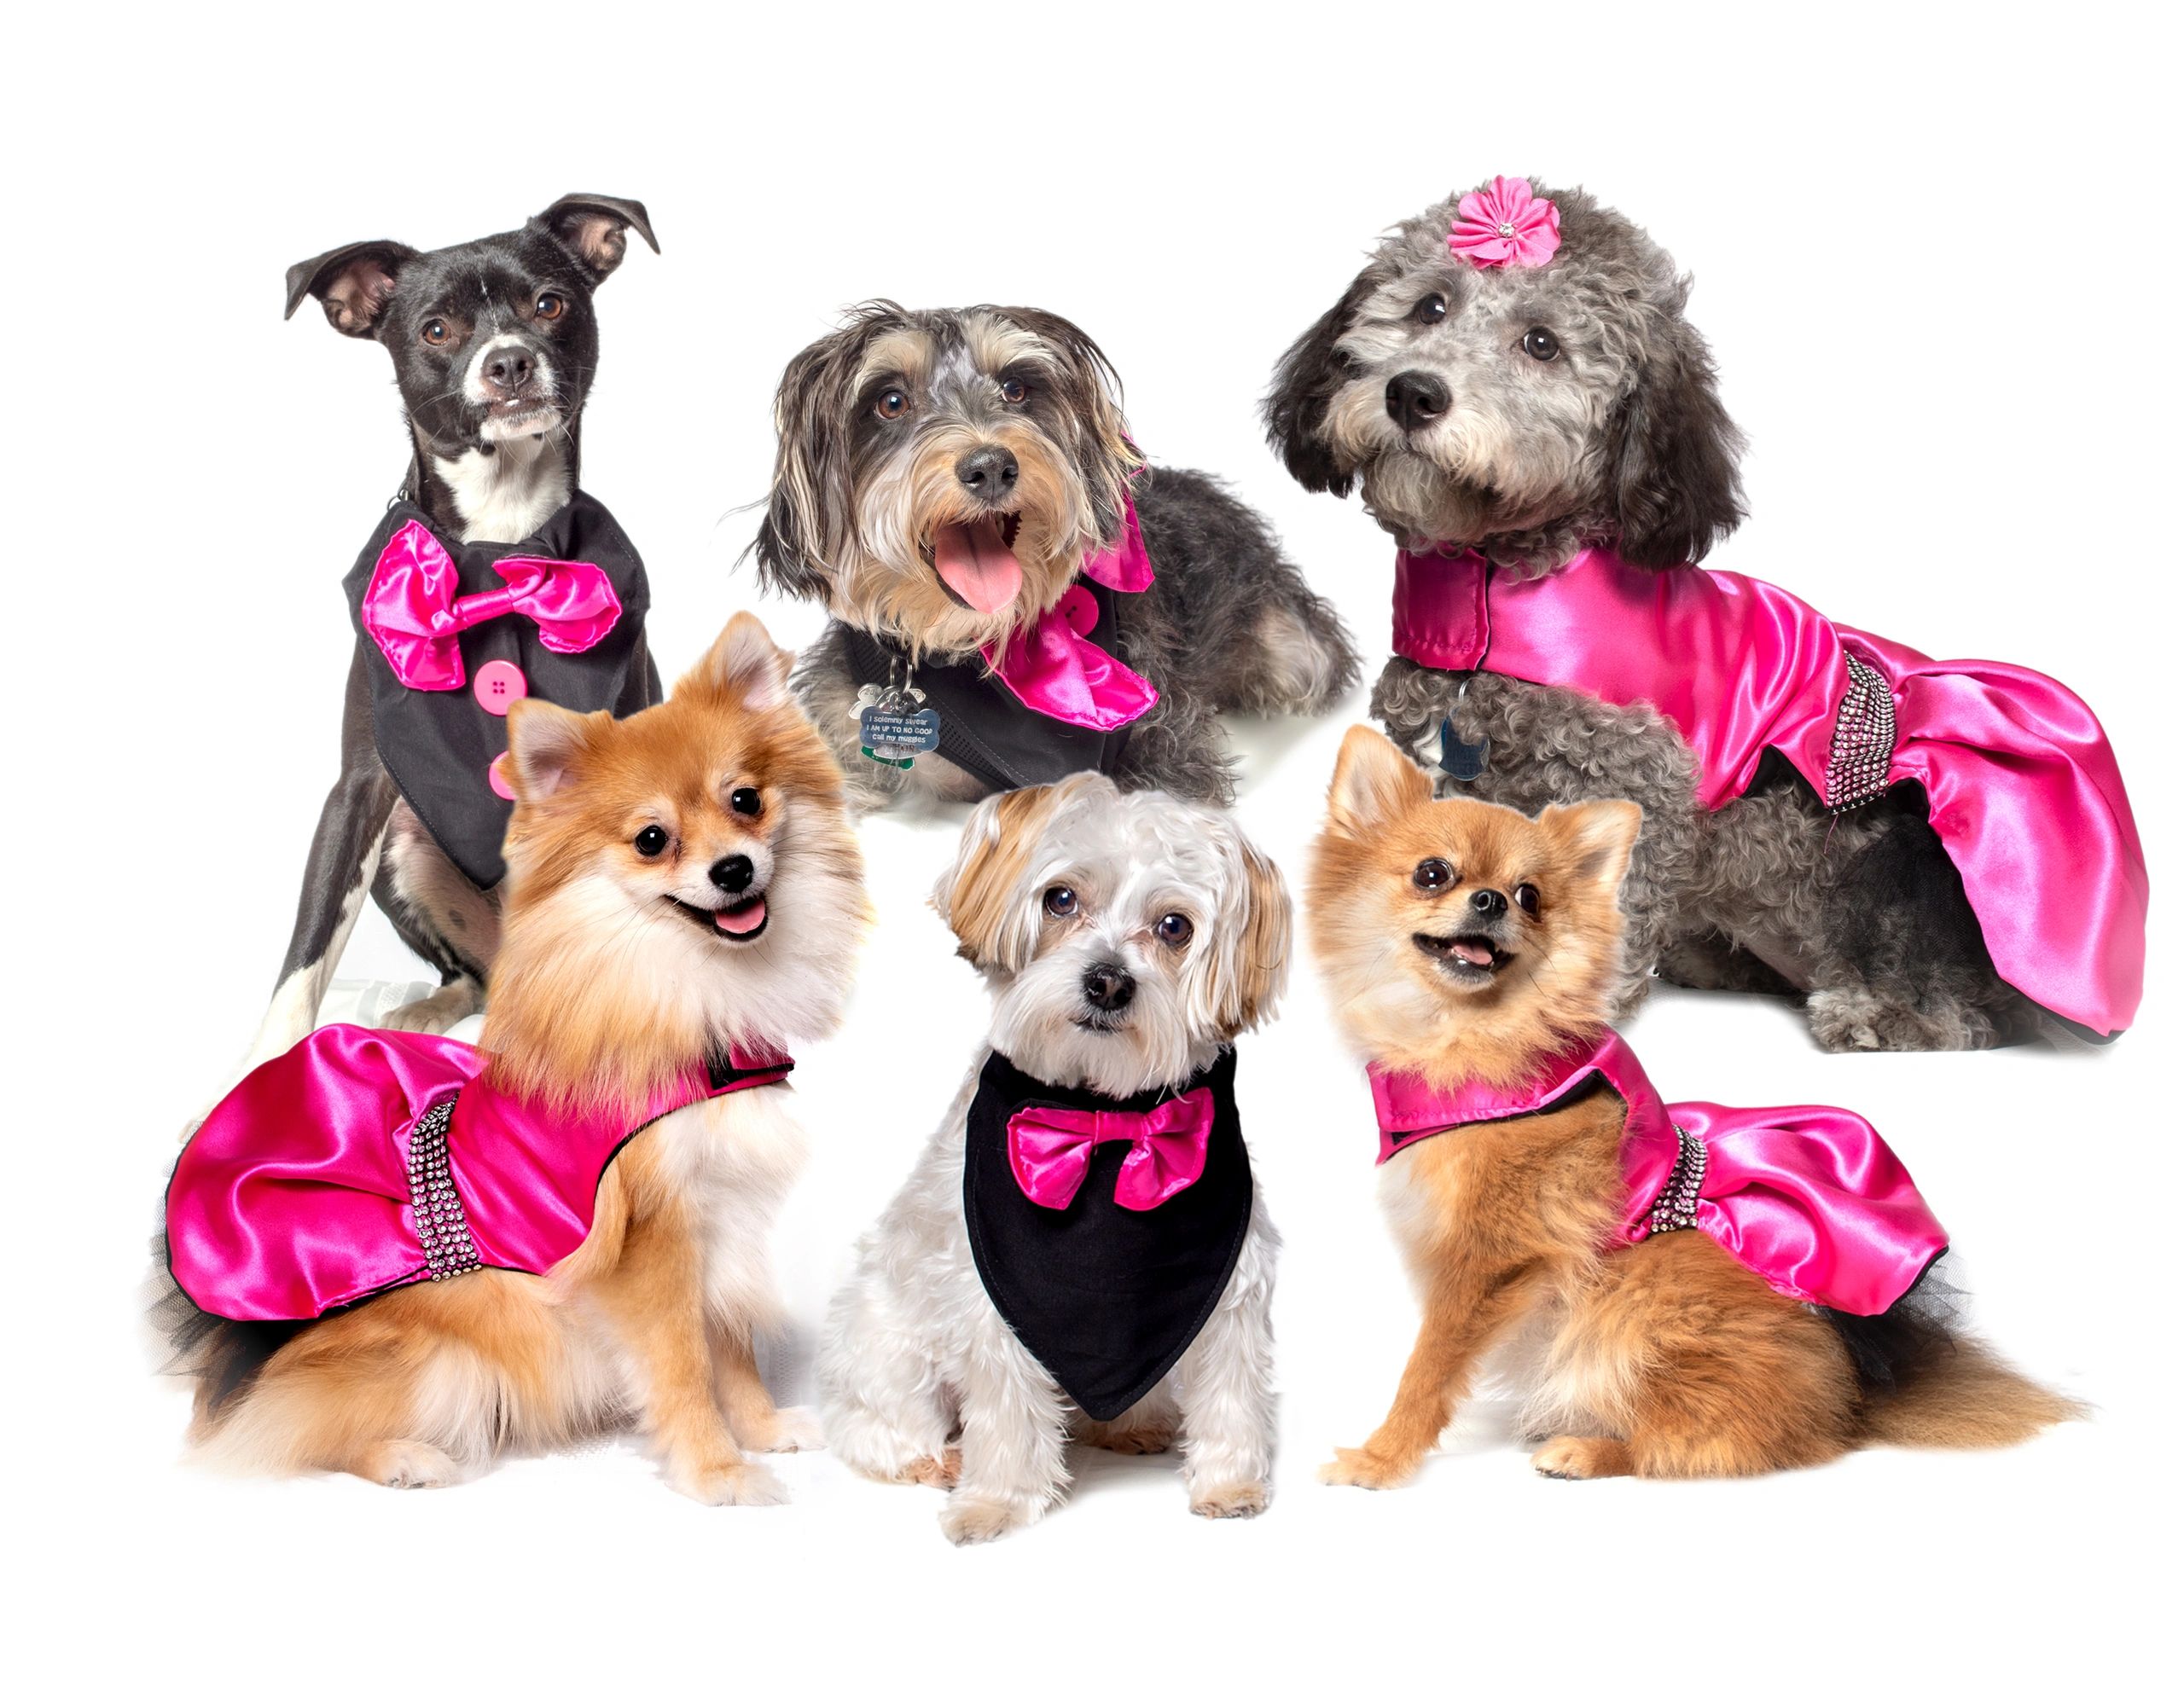 Bow ties high fashion for small dogs. Glam for dogs.